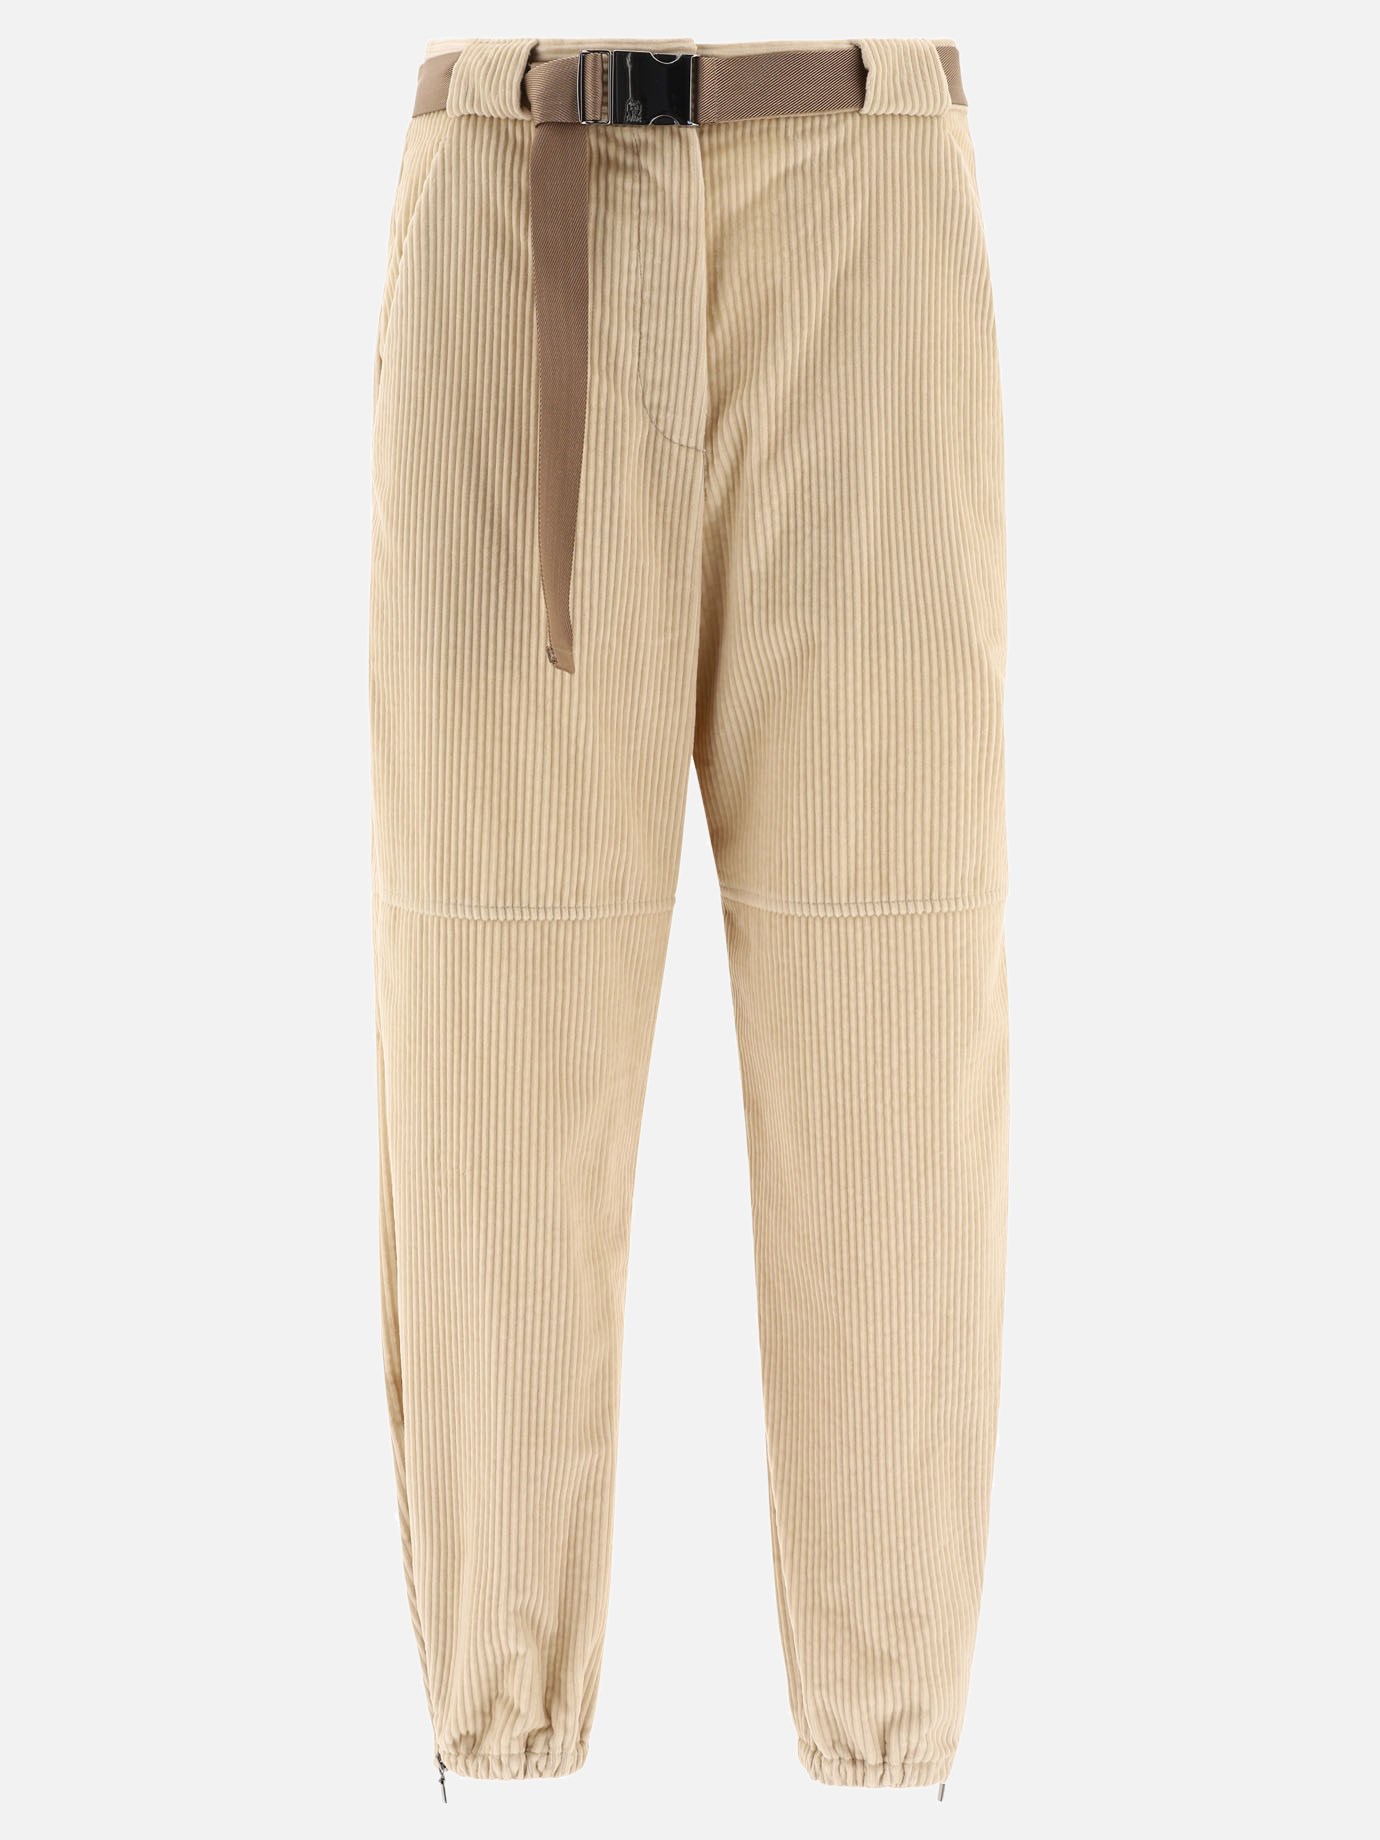 Ribbed trousers with beltby Brunello Cucinelli - 4